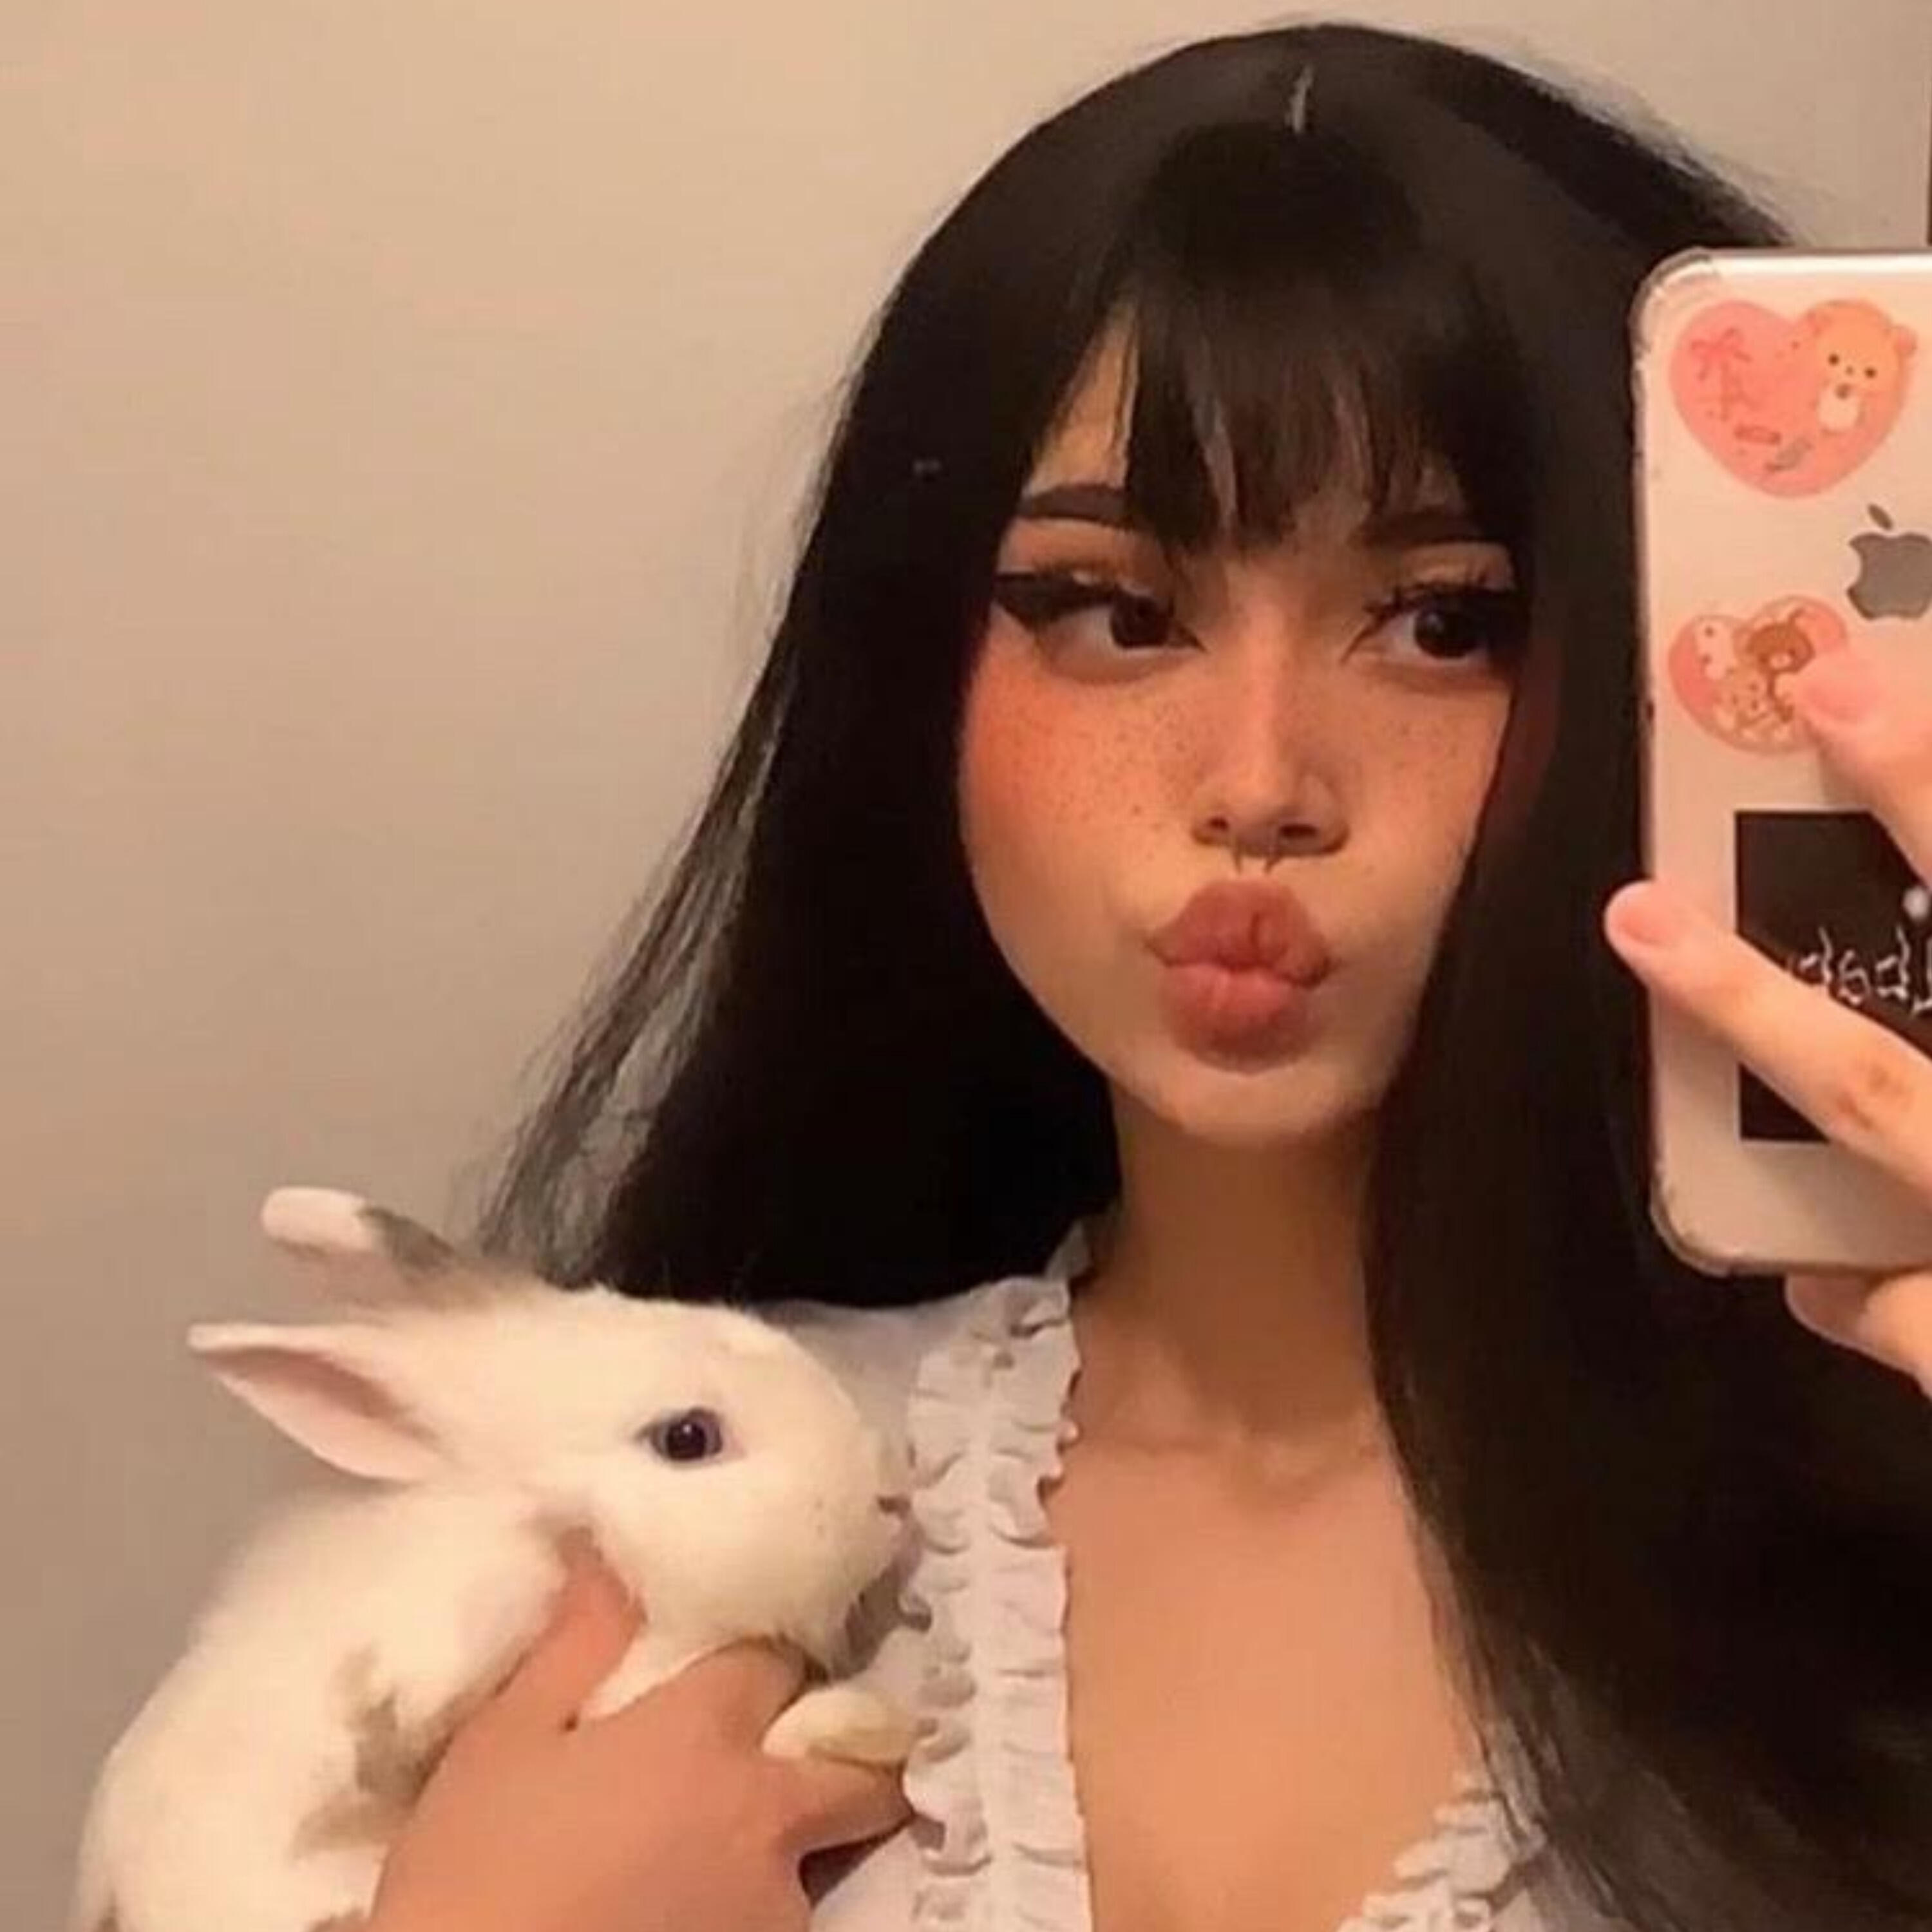 1nonly Bunny Girl Iheart 3926